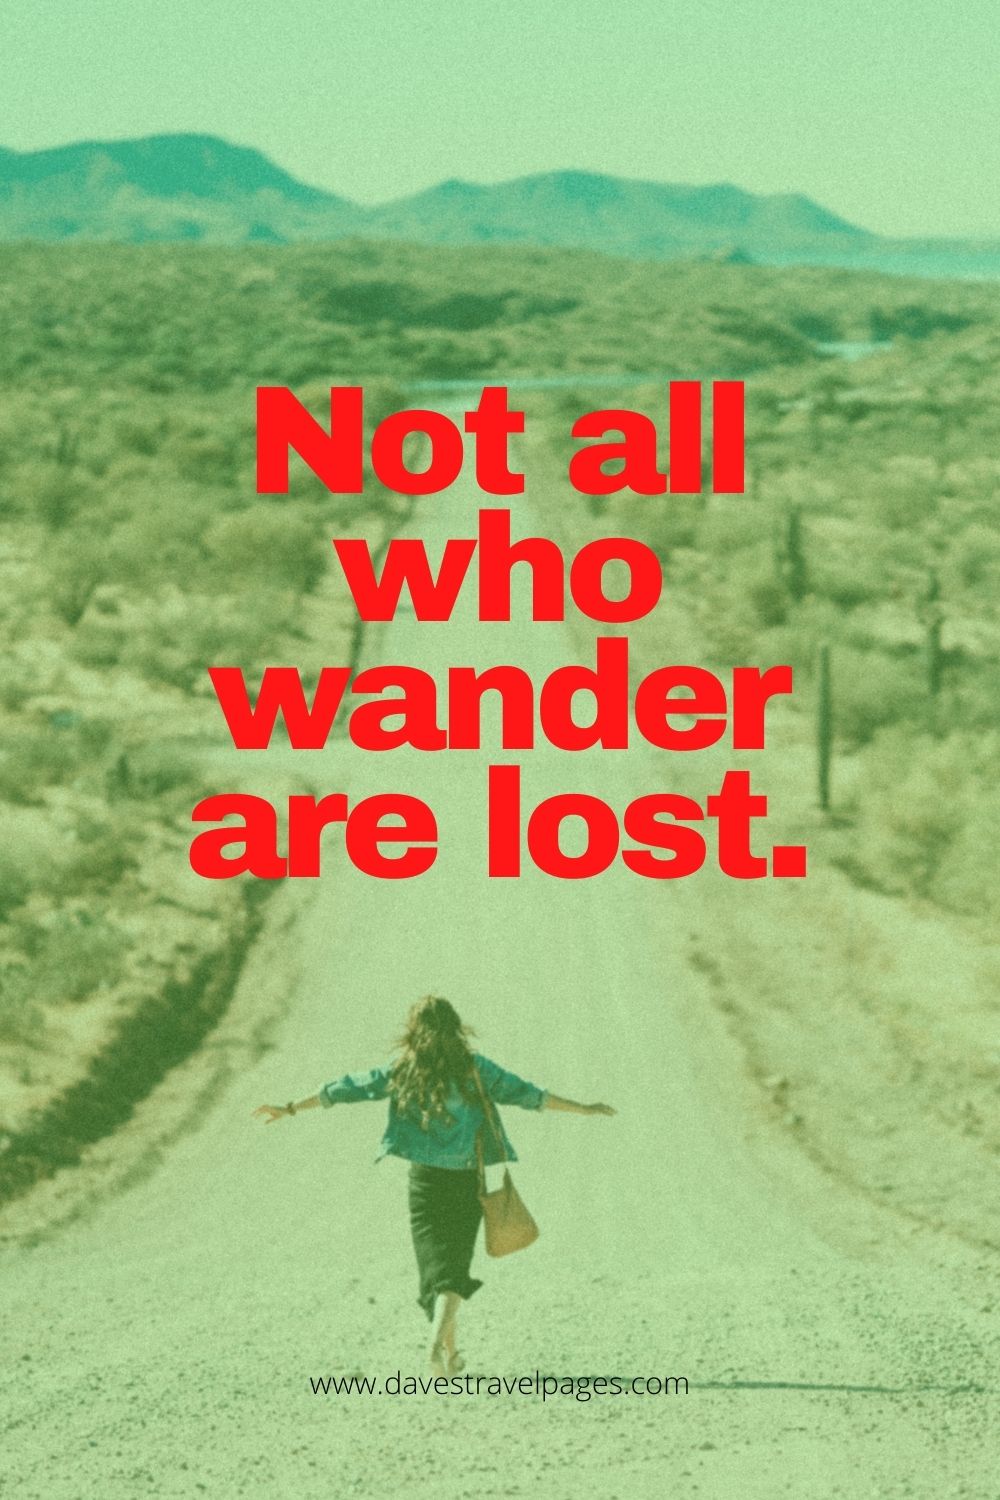 Not all who wander are lost caption